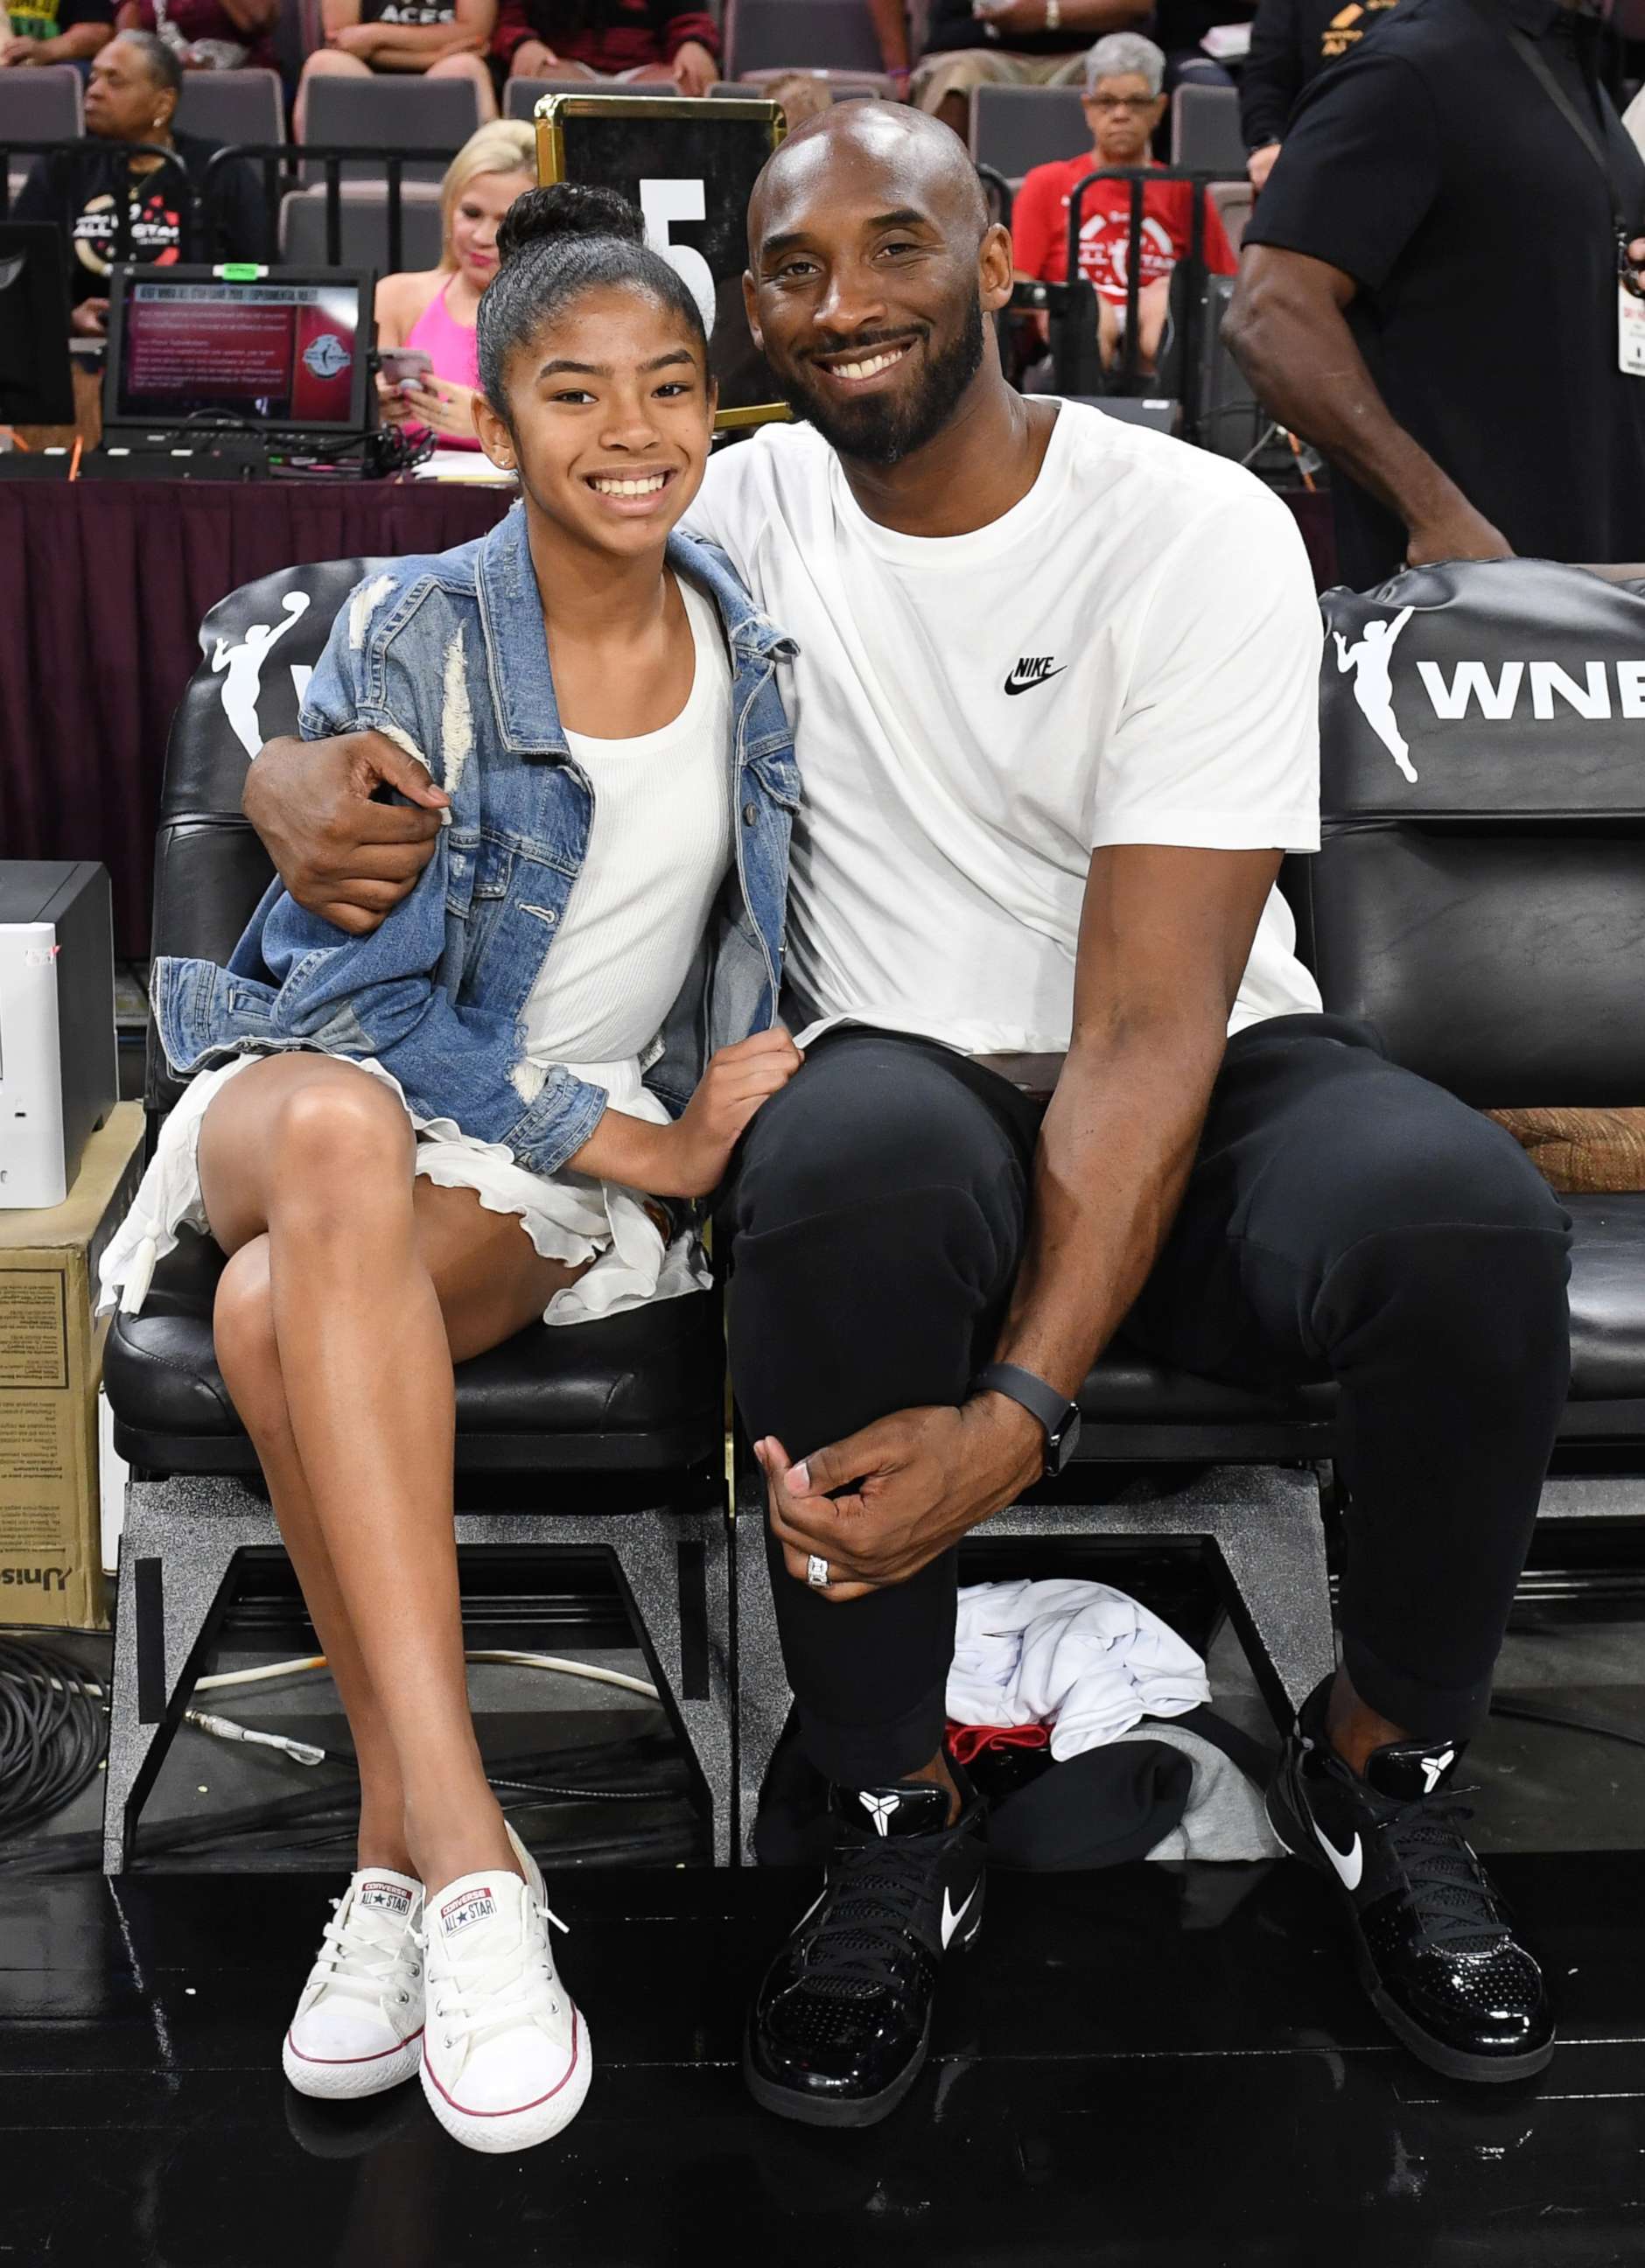 PHOTO: Gianna Bryant and her father, former NBA player Kobe Bryant, attend the WNBA All-Star Game 2019 at the Mandalay Bay Events Center, July 27, 2019, in Las Vegas.